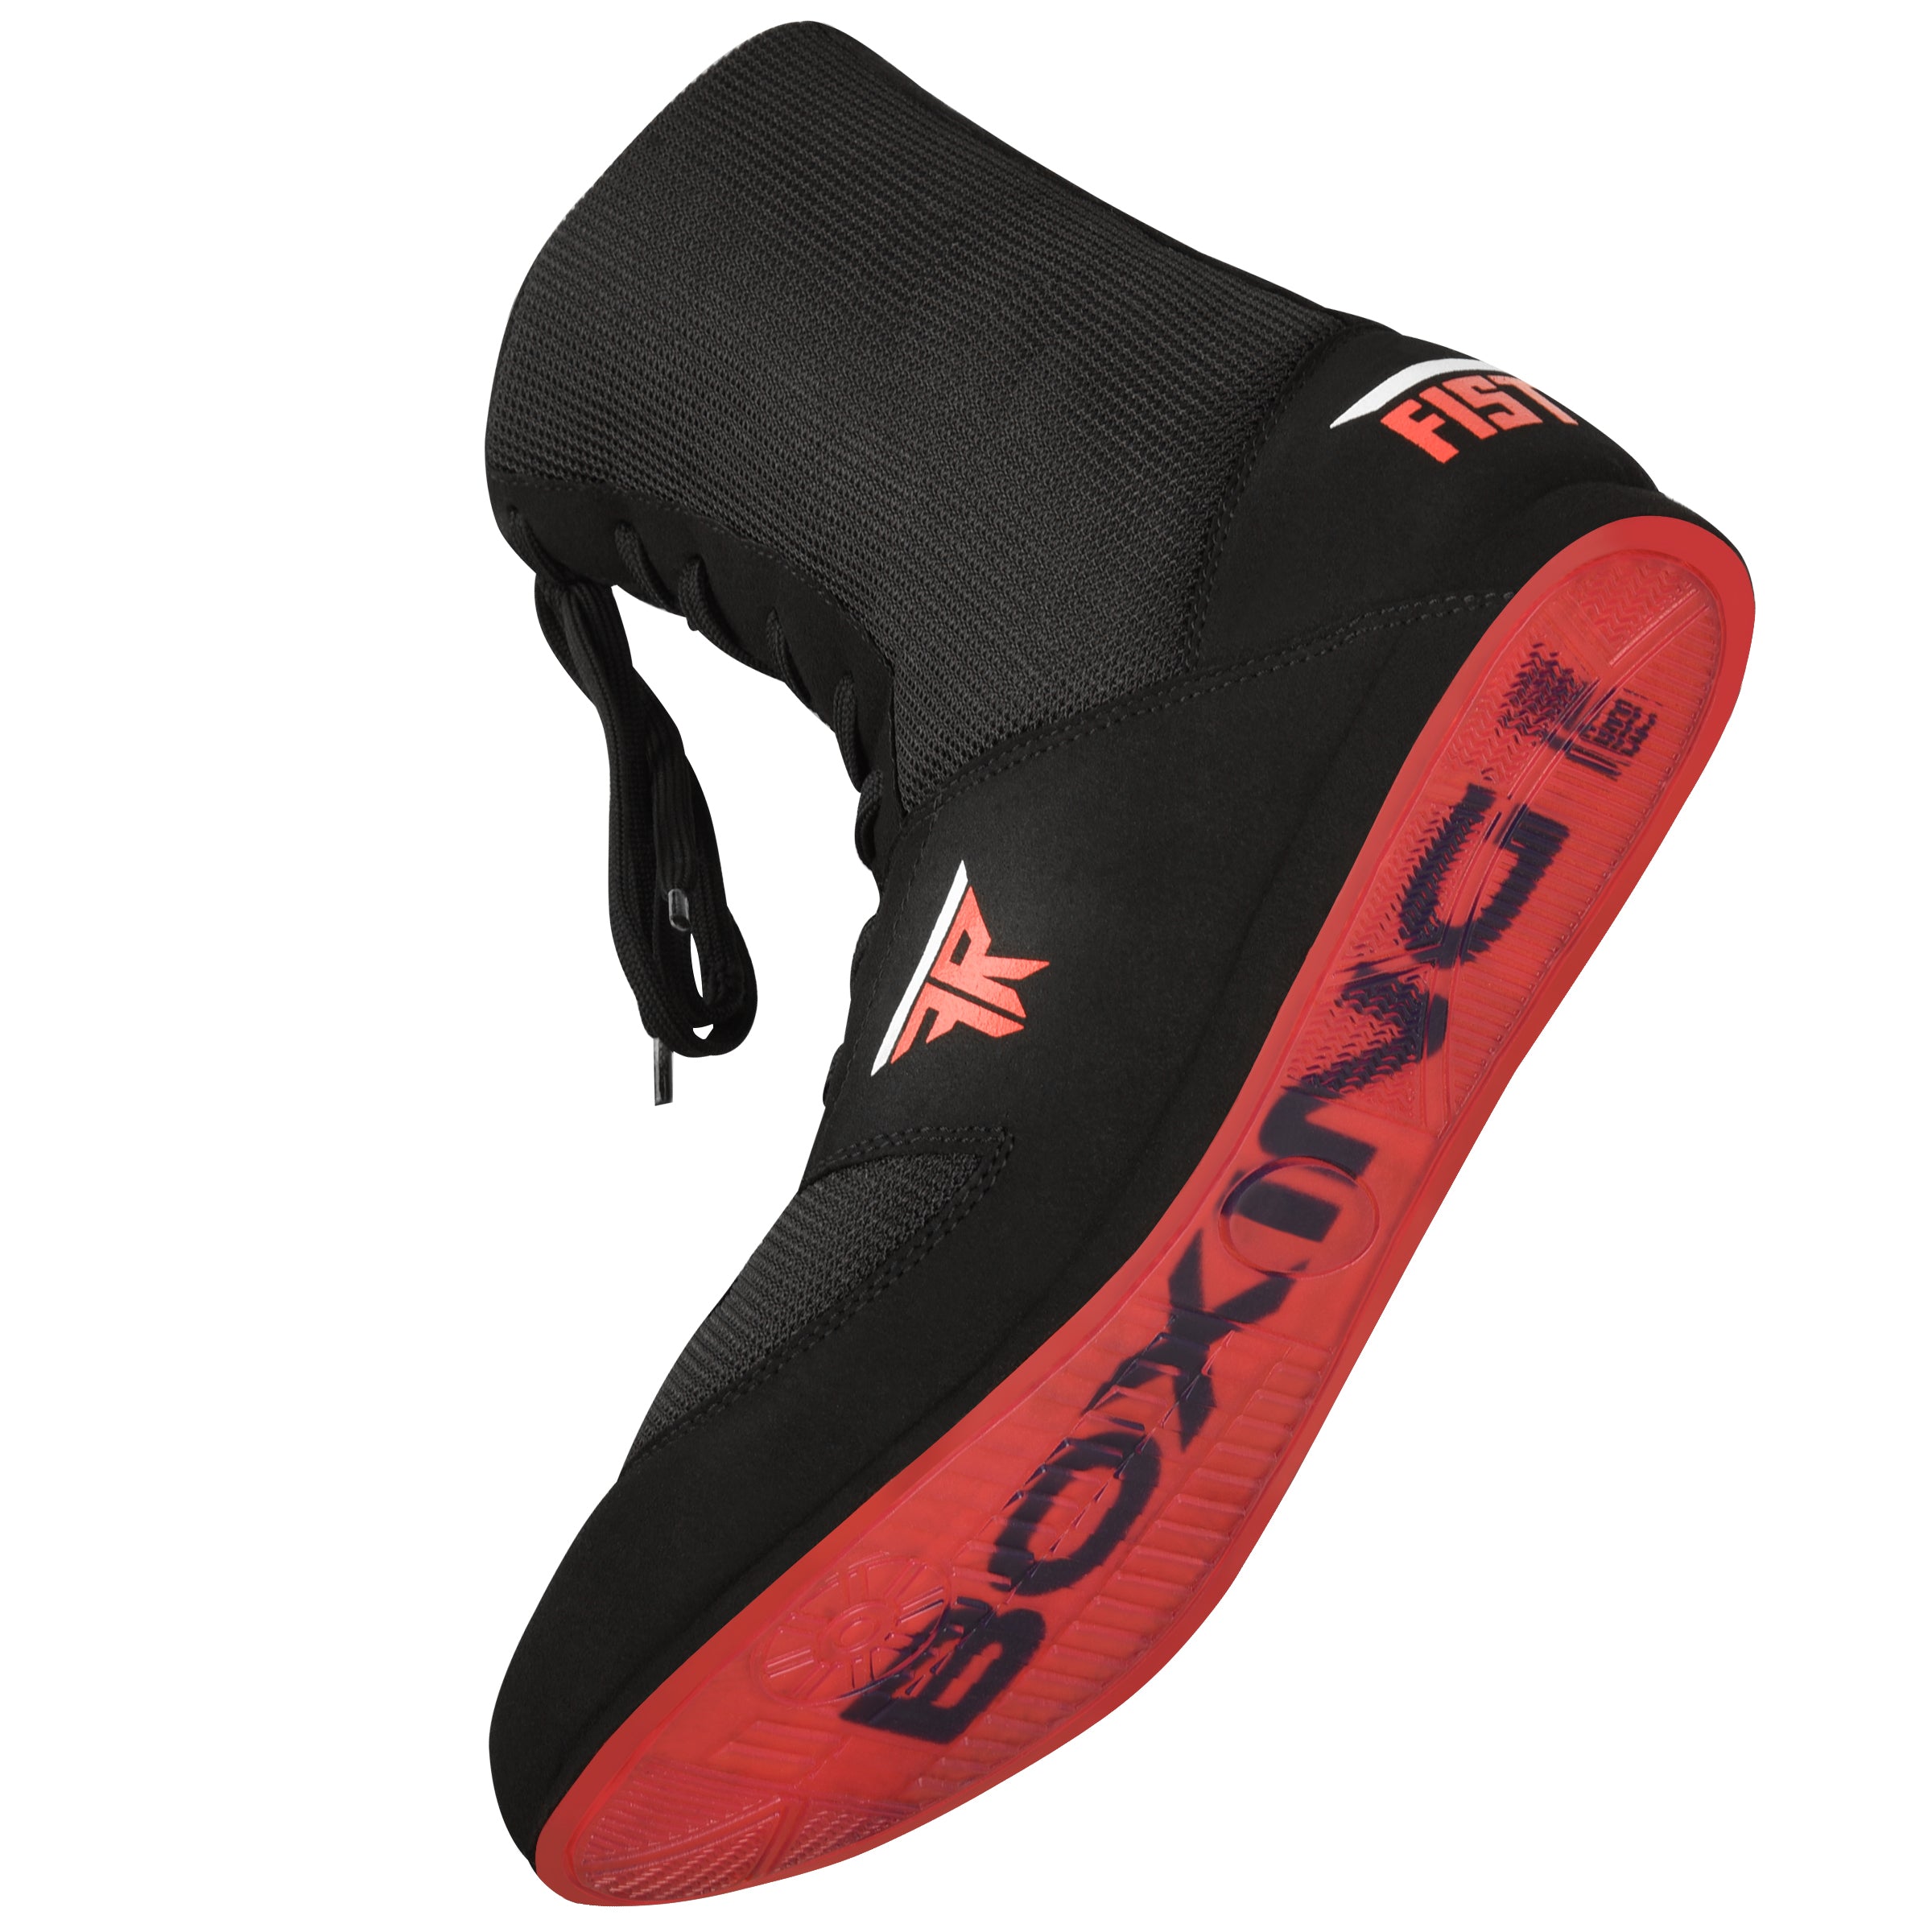 FISTRAGE HIGH TOP BOXING SHOES - image 3 of 7